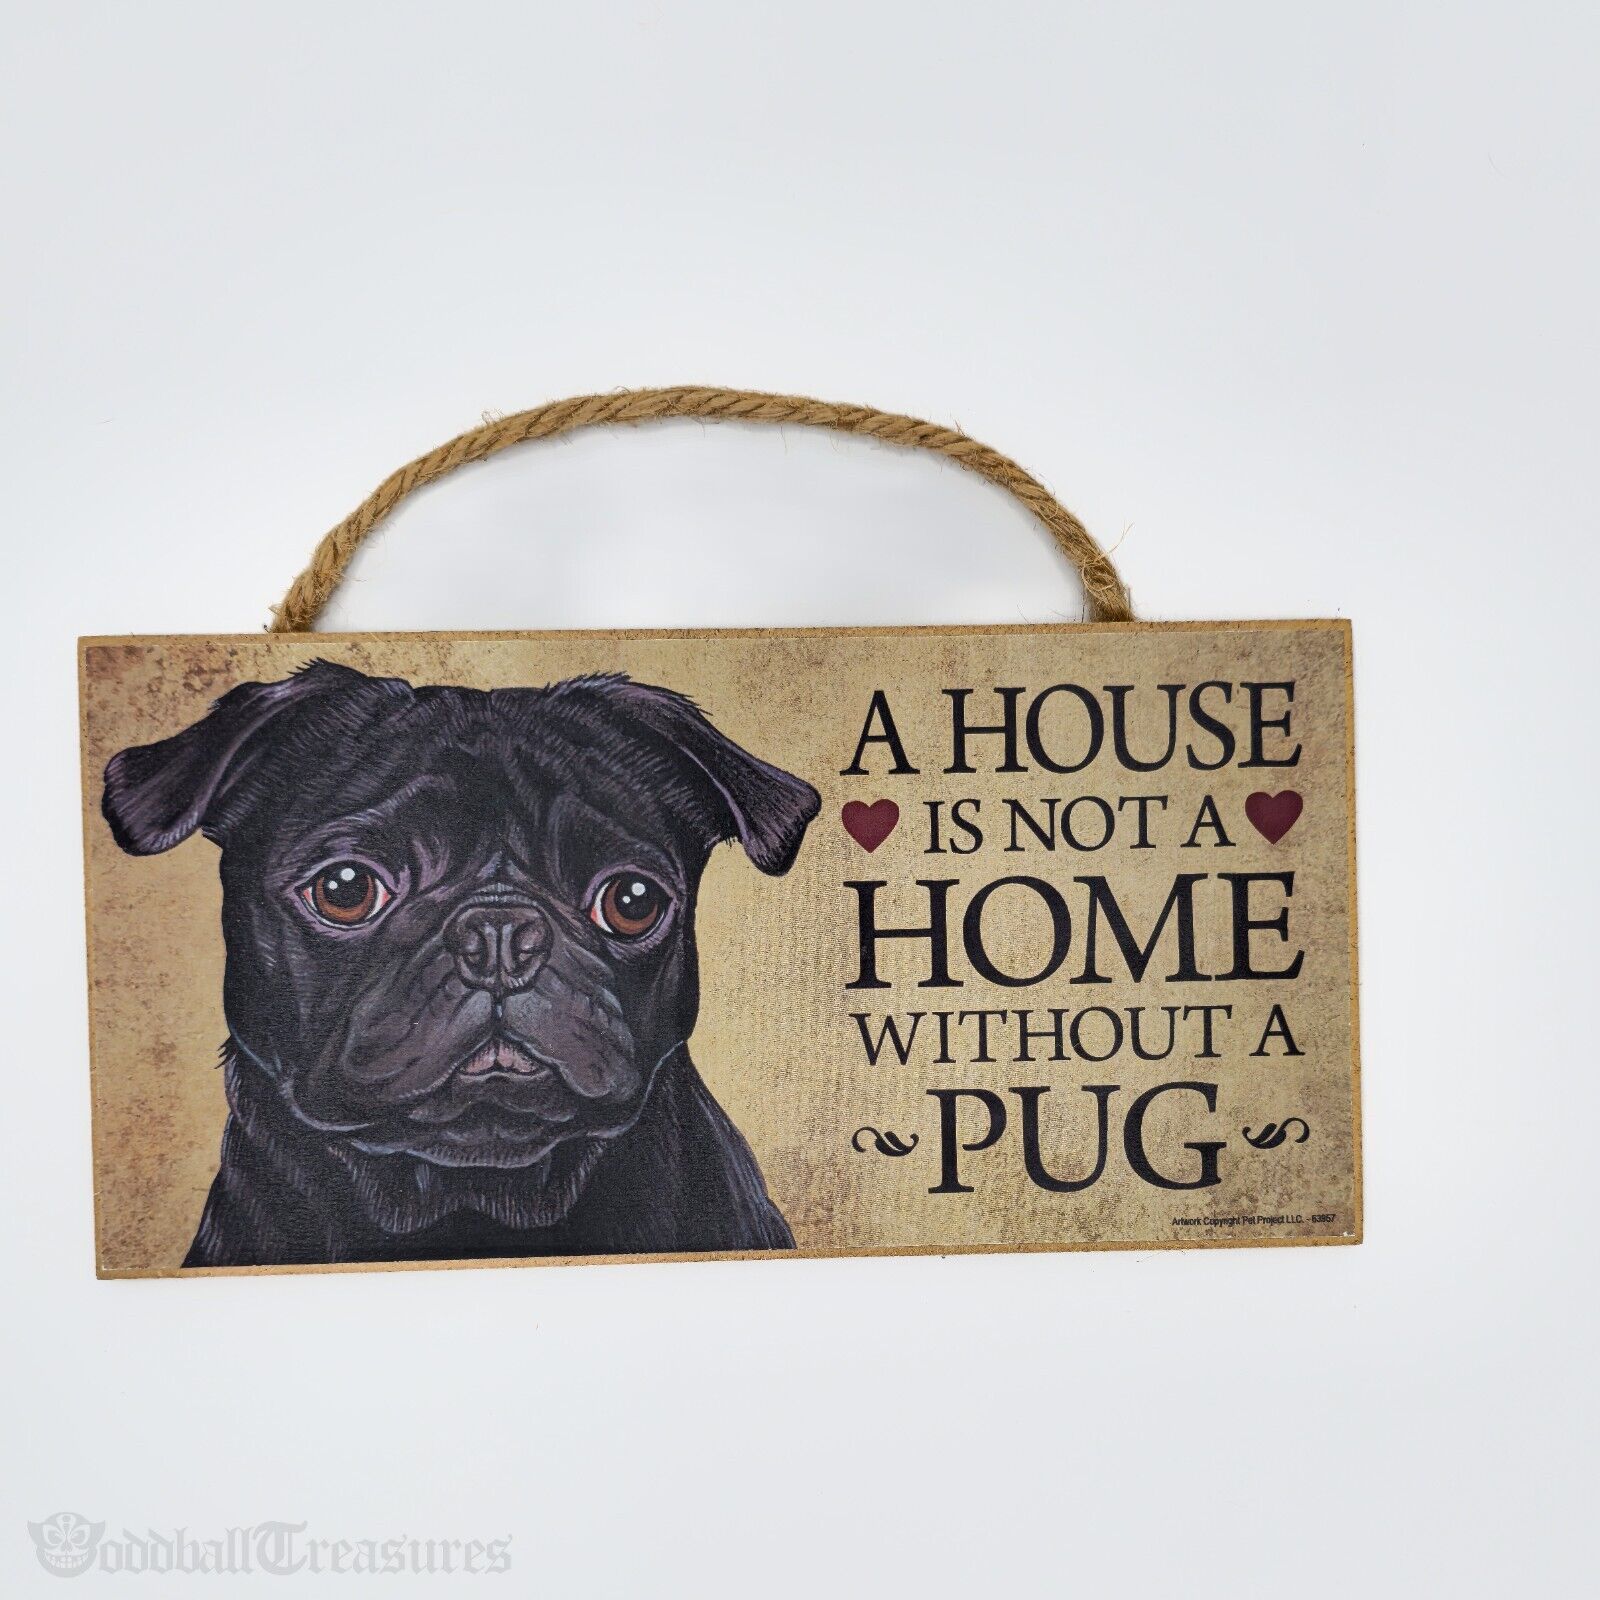 House in not a Home Without a PUG - 5 X 10 hanging Wood Sign made in the USA